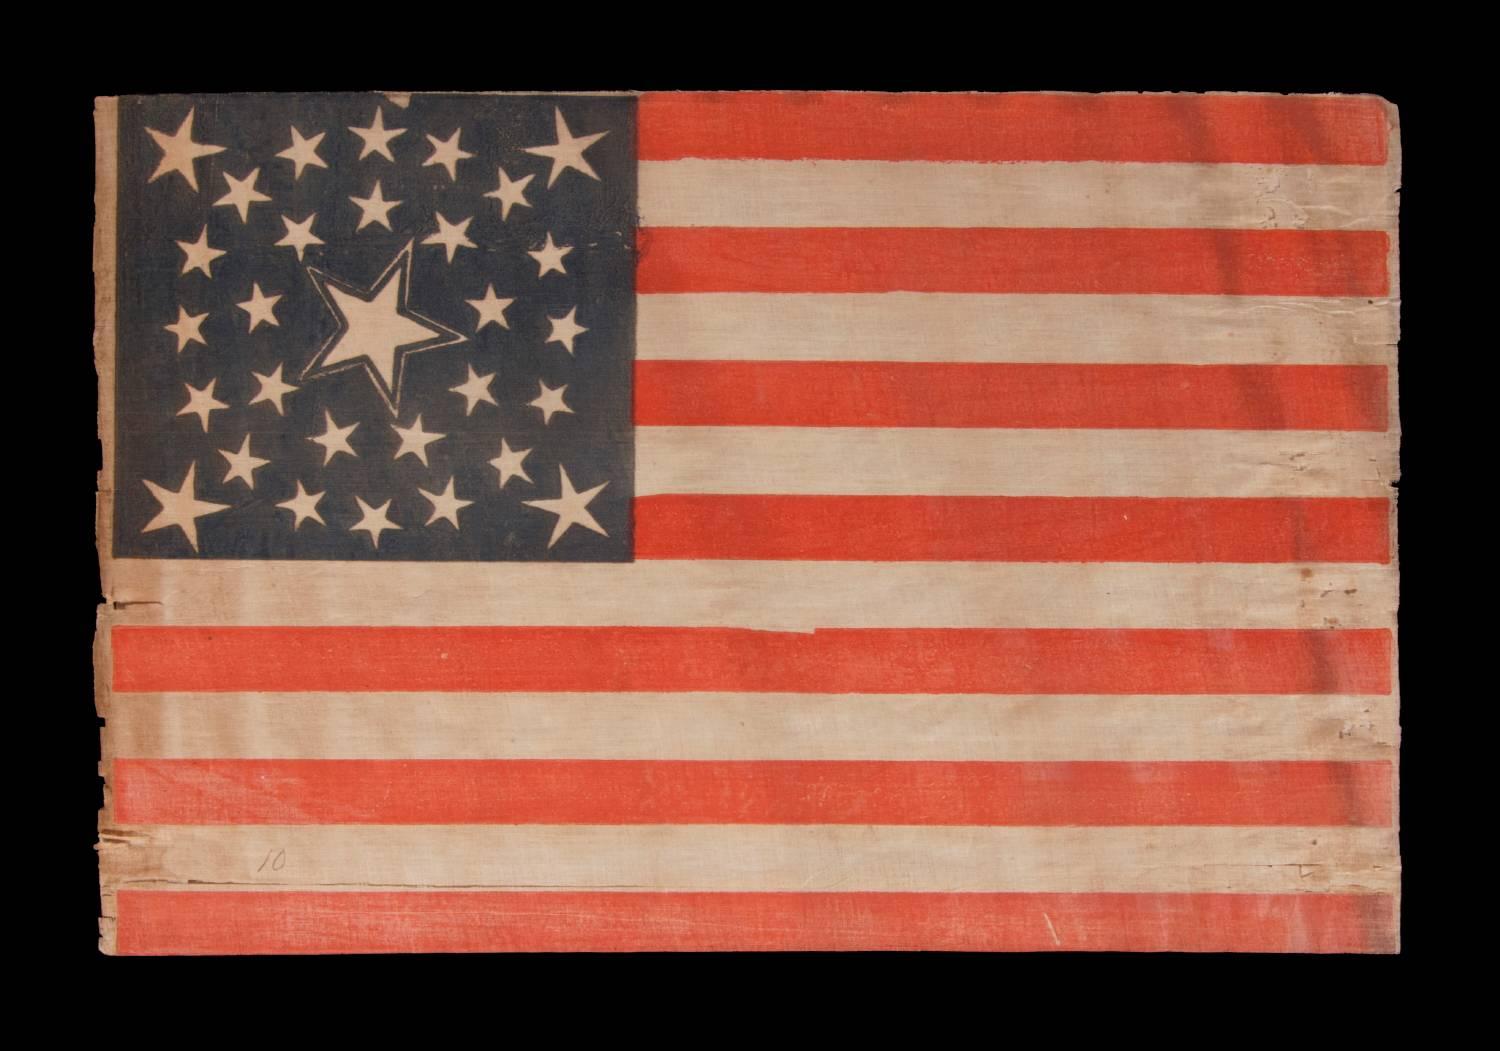 30 stars on an antique American flag of the pre-Civil War era, rare and beautiful, with a medallion configuration that features a haloed center star, Wisconsin statehood, 1848-1850:

30 star American national parade flag, block-printed on coarse